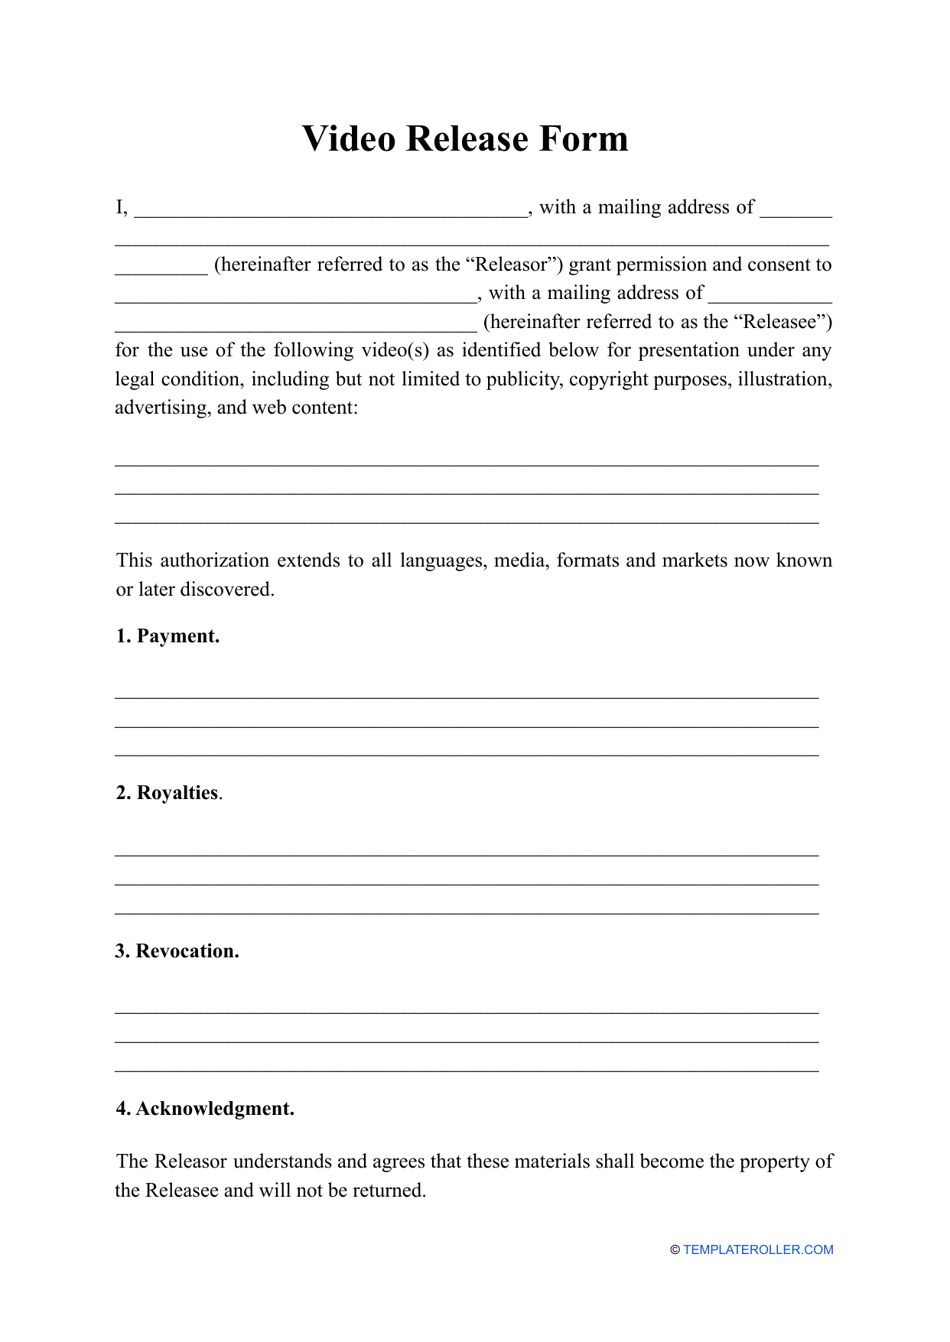 Video Release Form, Page 1